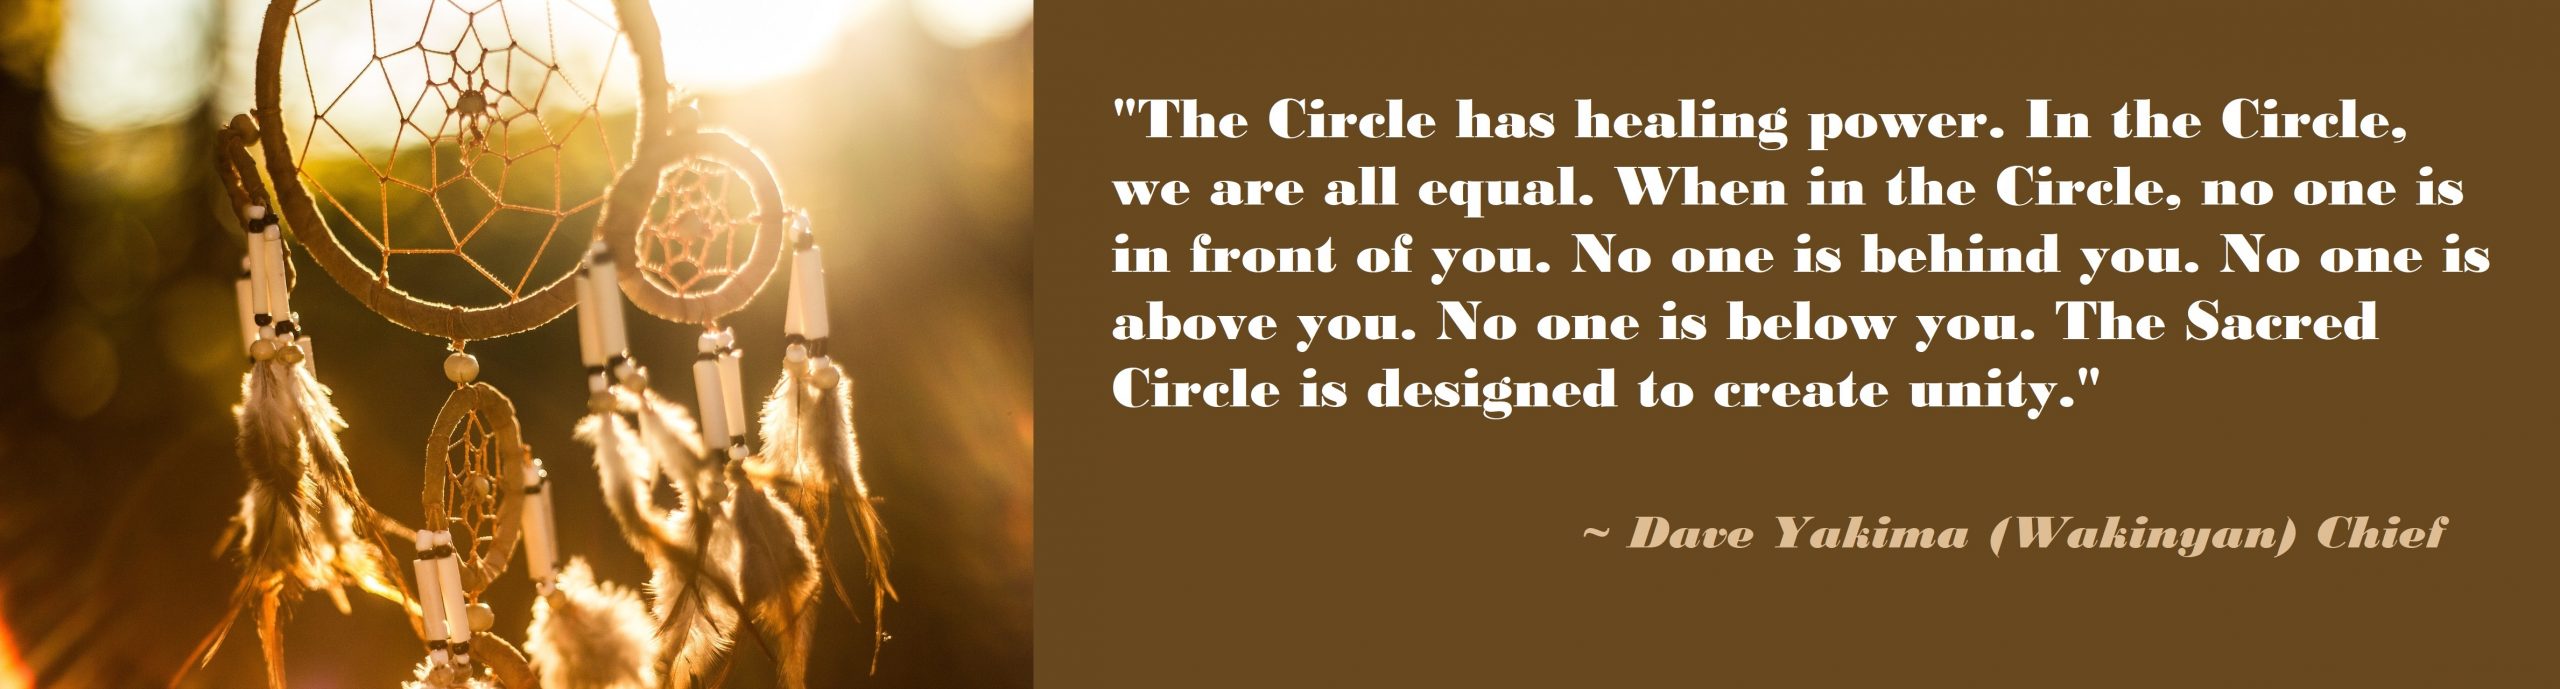 The Circle has healing power. In the Circle, we are all equal. When in the Circle, no one is in front of you. No one is behind you. No one is above you. No one is below you. The Sacred Circle is designed to create unity. Dave Yakima (Wakinyan) Chief